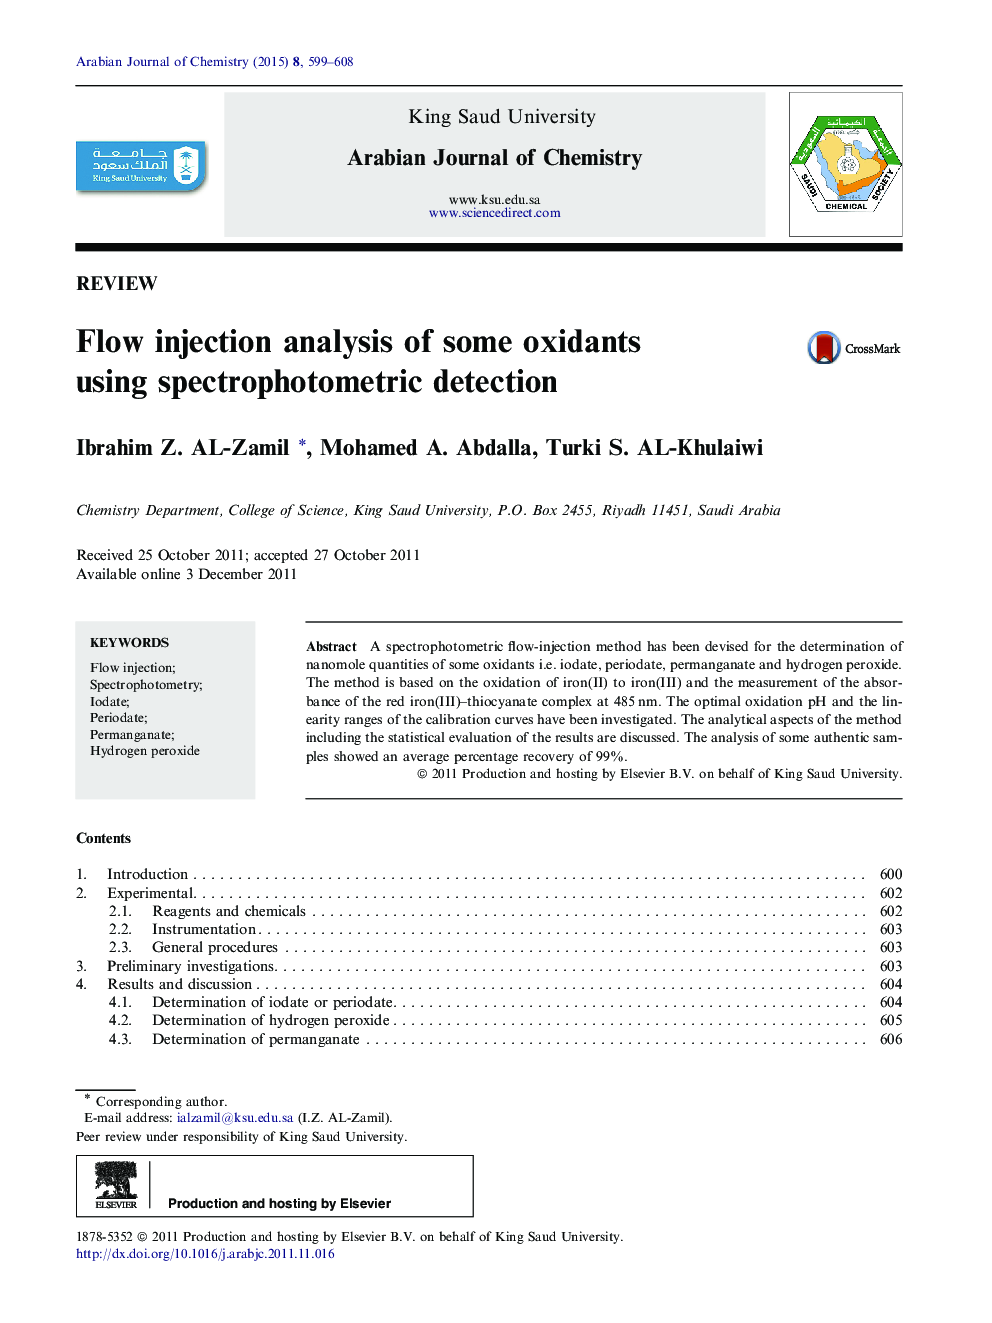 Flow injection analysis of some oxidants using spectrophotometric detection 